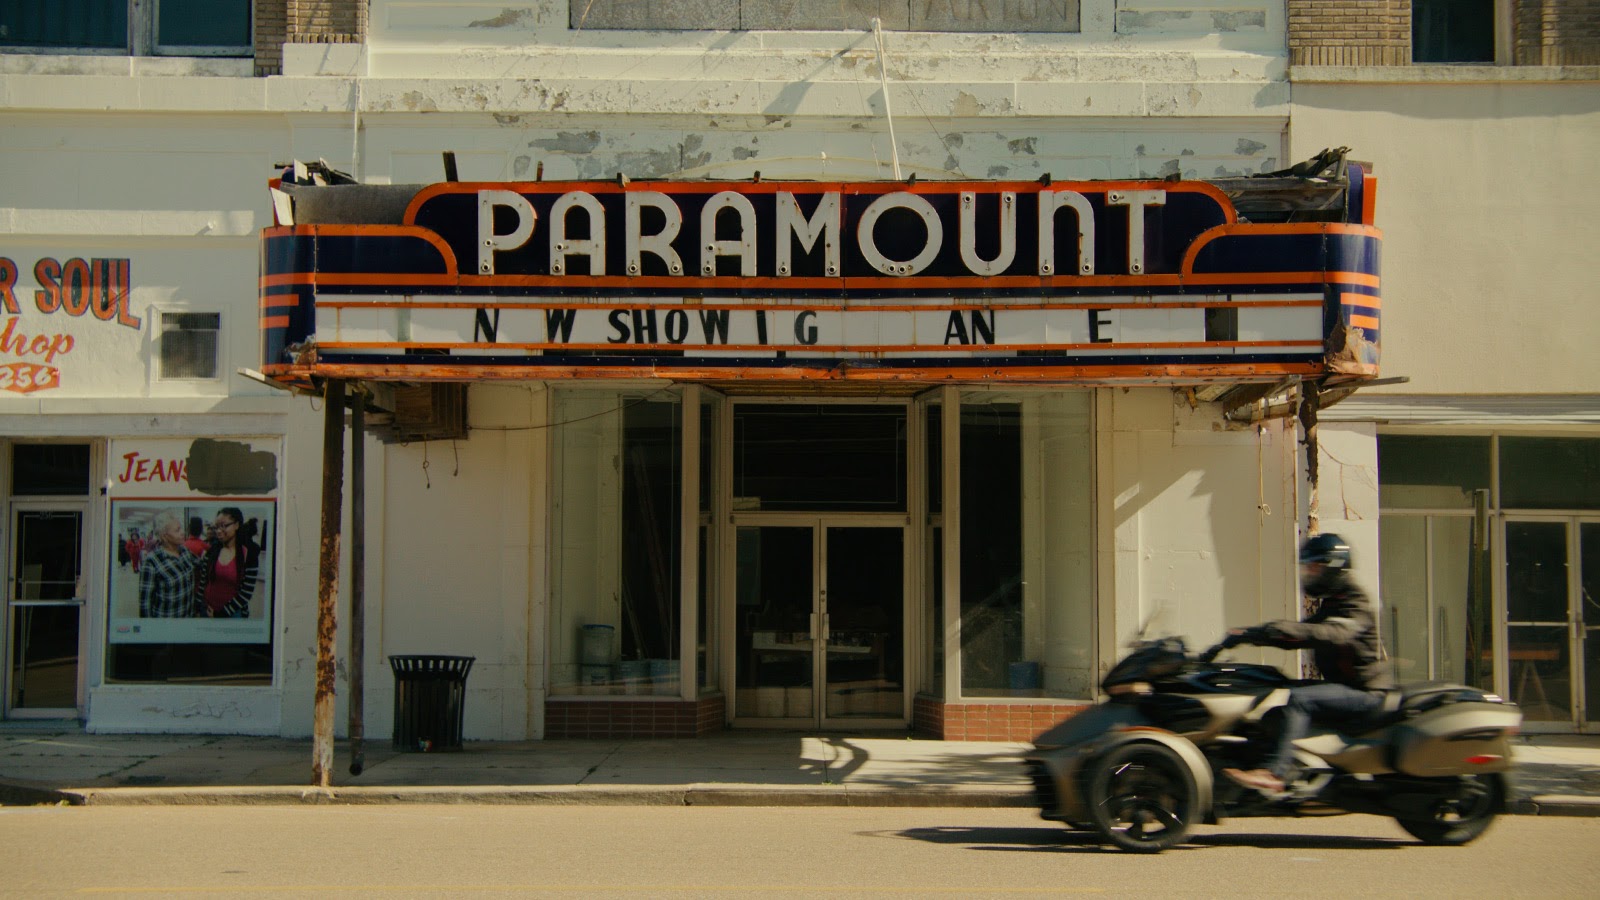 Driving past the Paramount Theatre in Mississippi